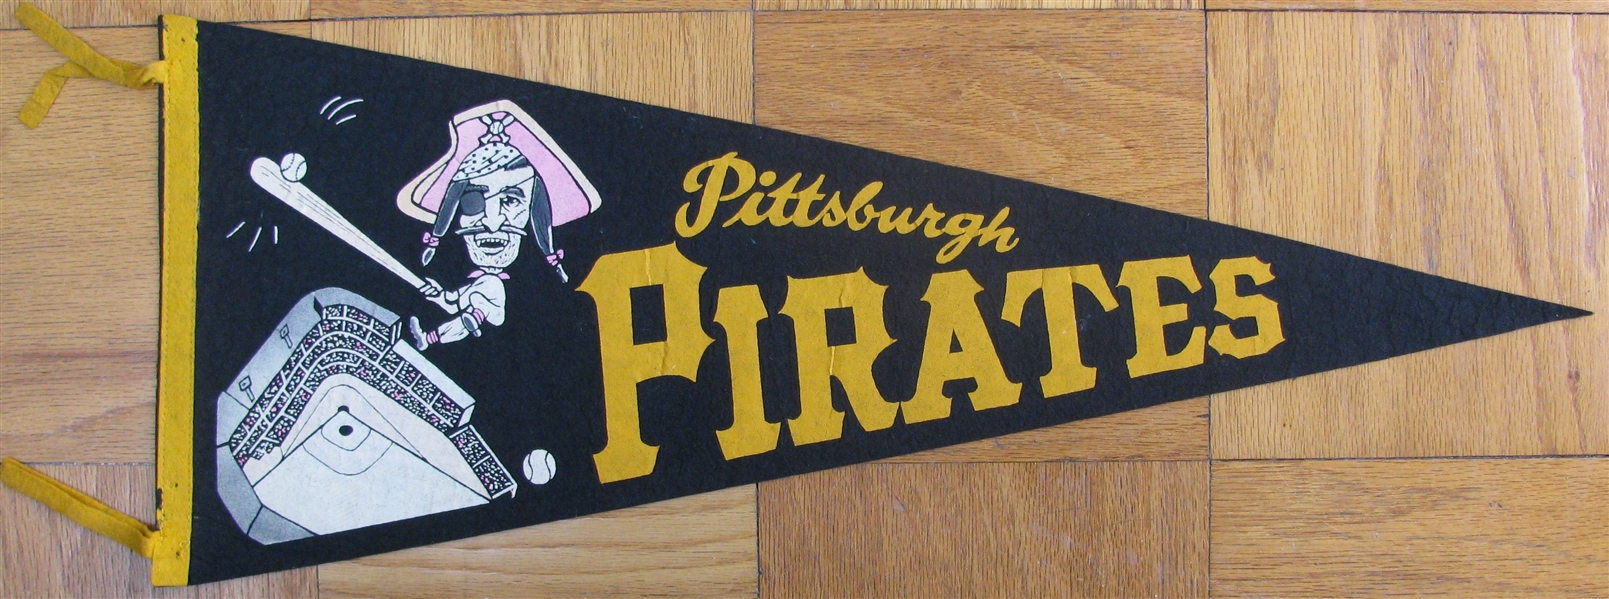 60's PITTSBURGH PIRATES PENNANT